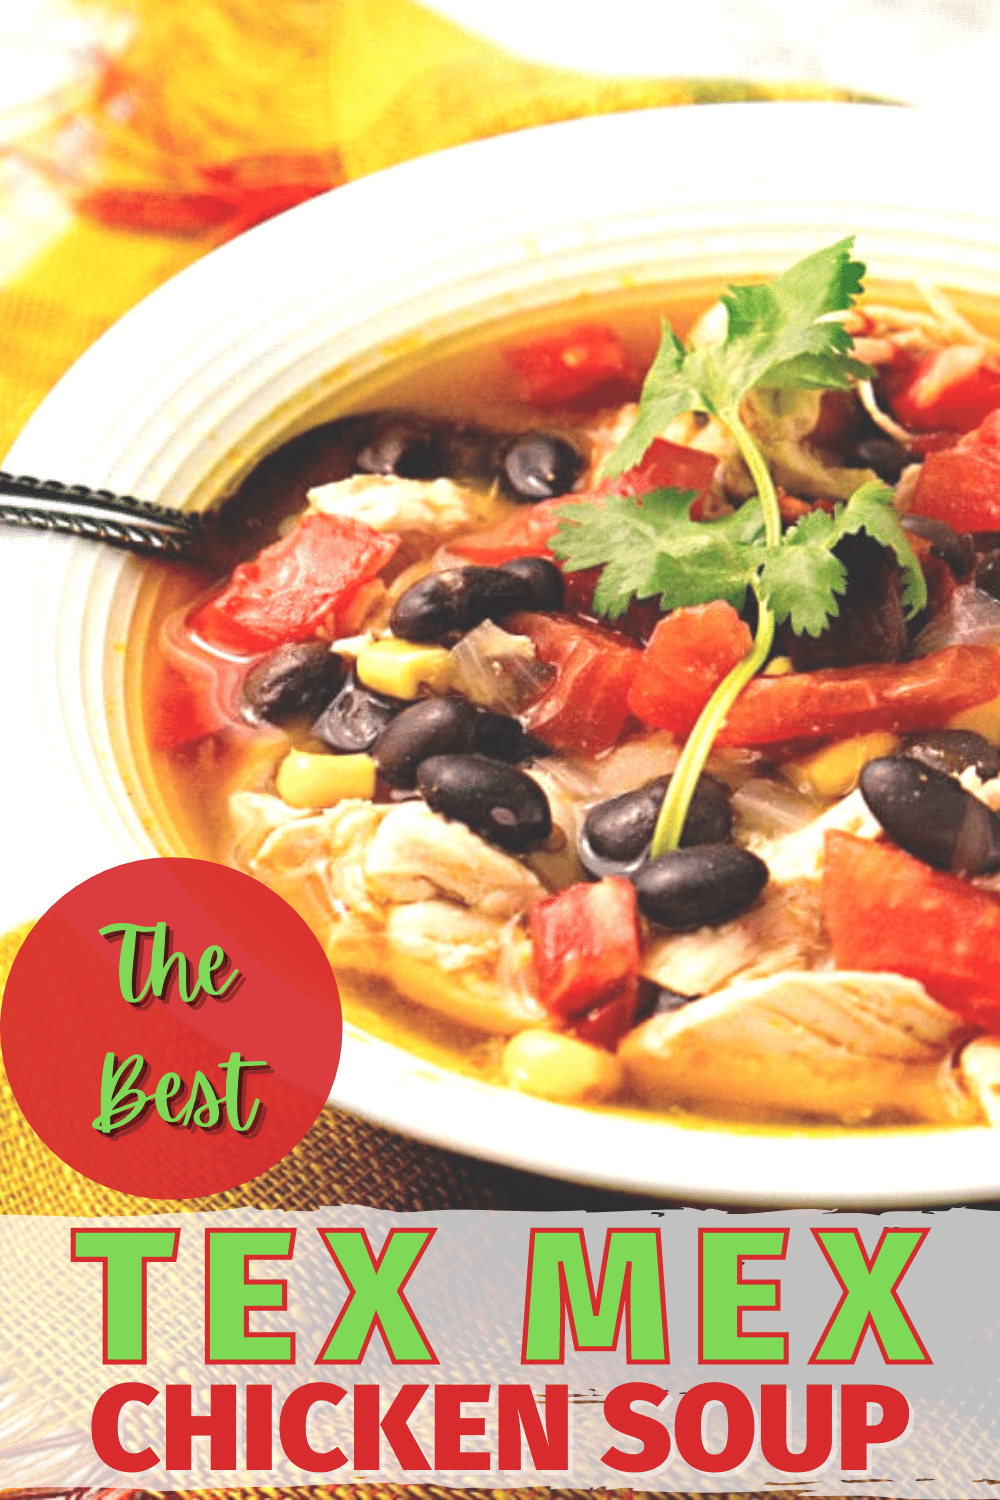 If you like Tex Mex flavors you are going to love this soup! It's full of your favorite flavors that are made even better with a secret ingredient. #texmex #soup #recipes via @wondermomwannab